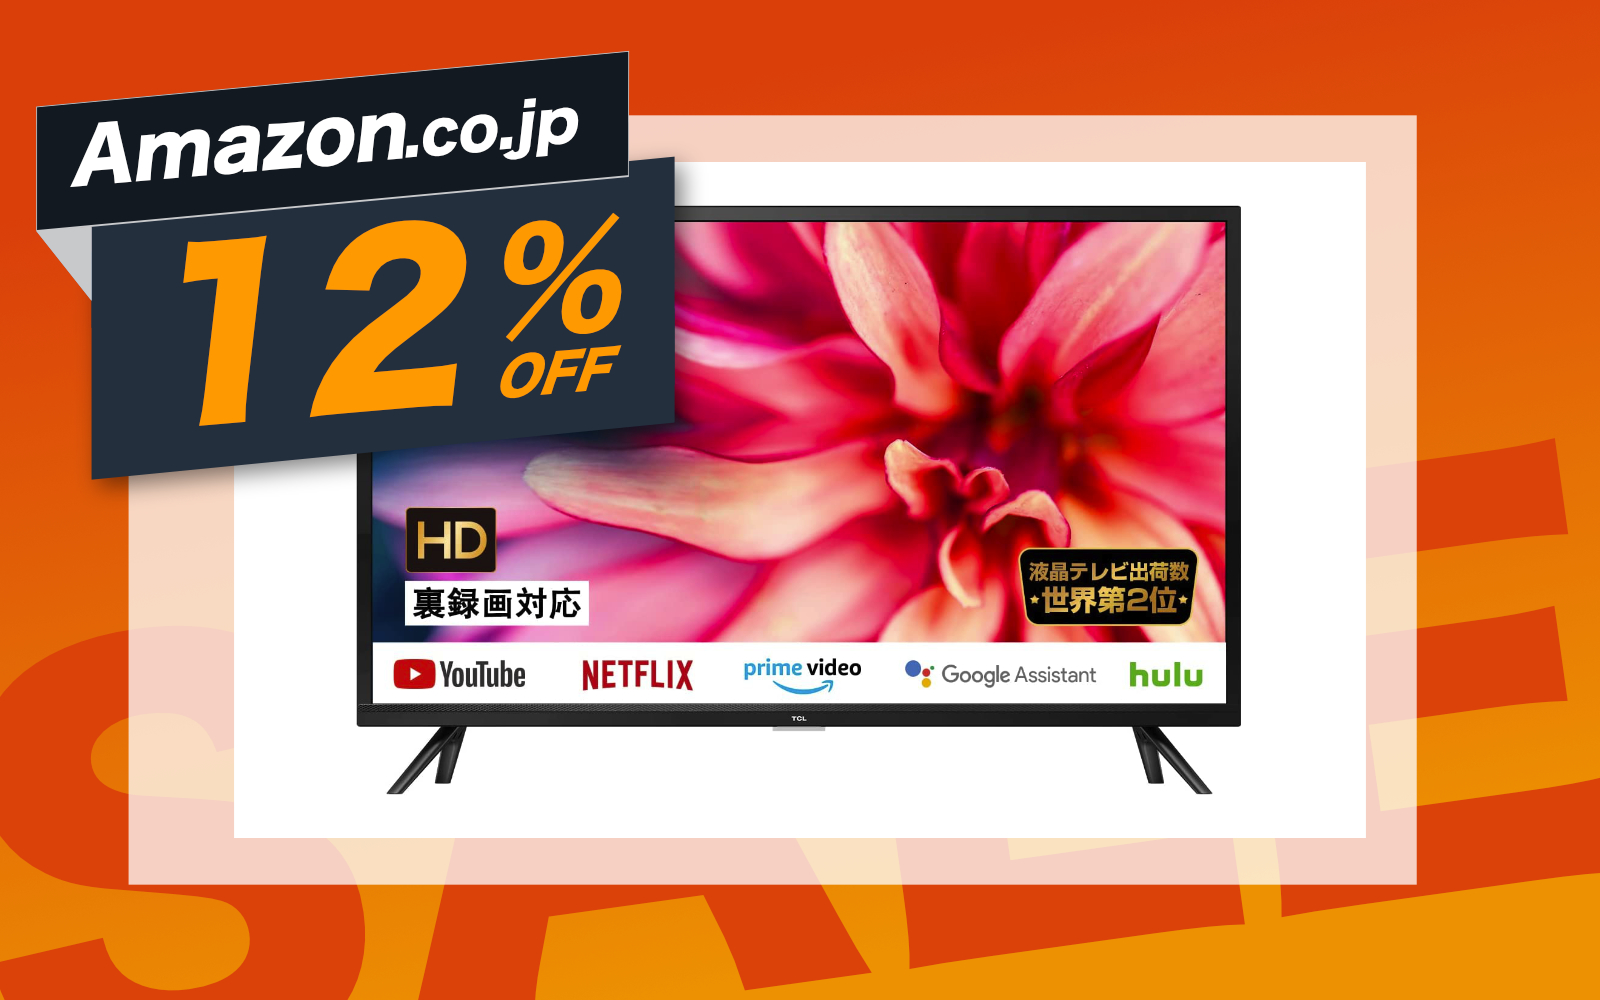 TcL TV on sale again